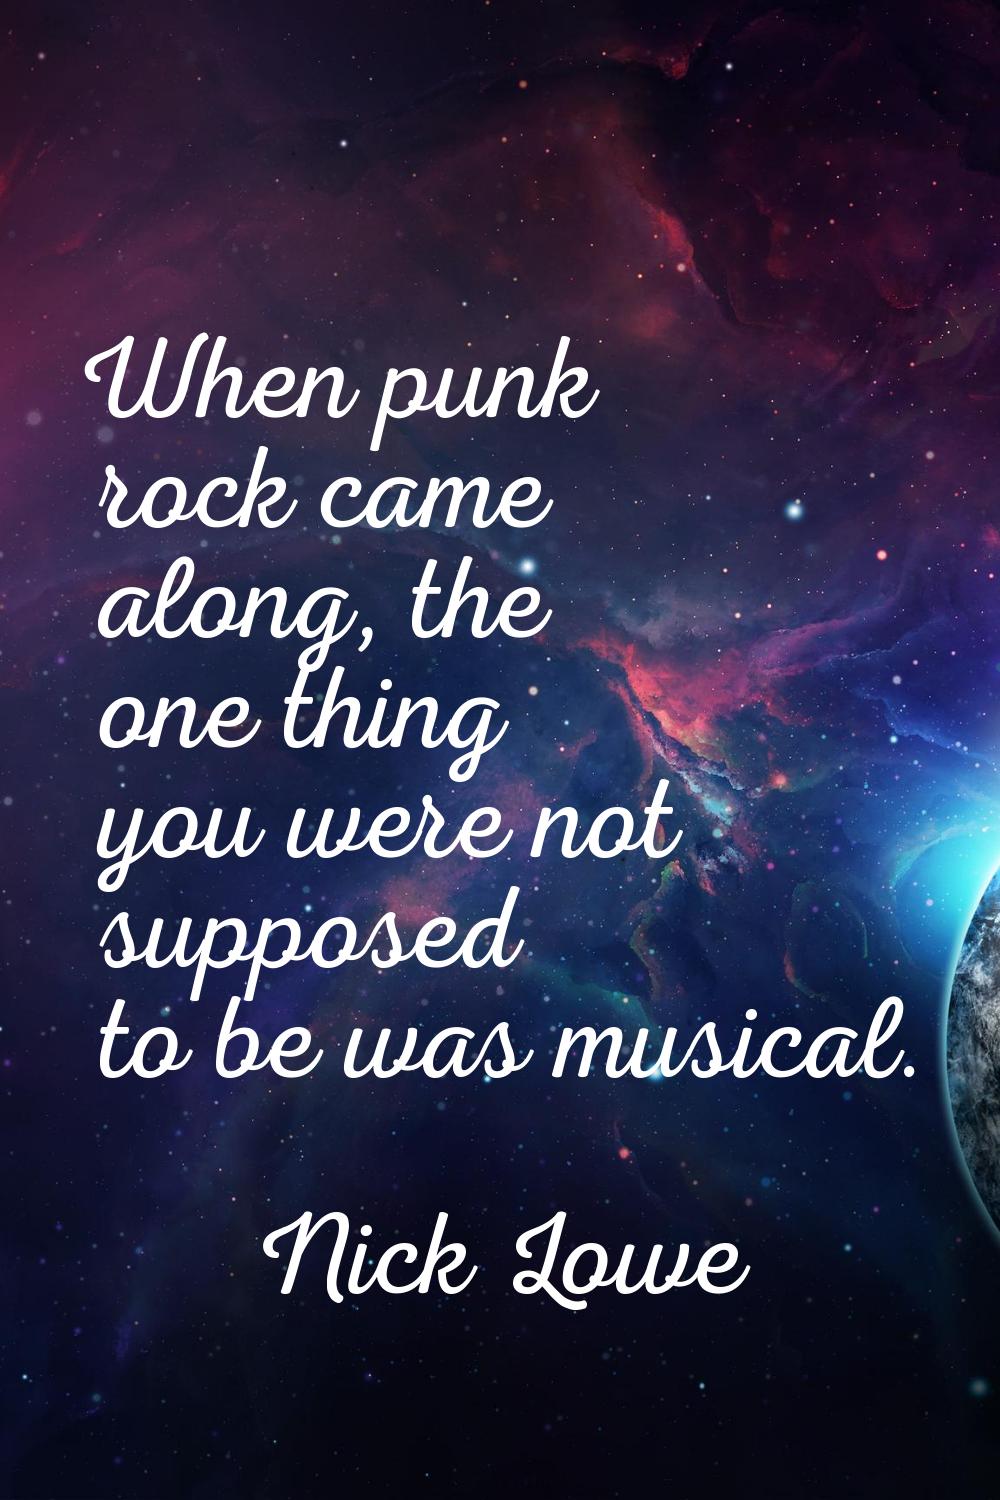 When punk rock came along, the one thing you were not supposed to be was musical.